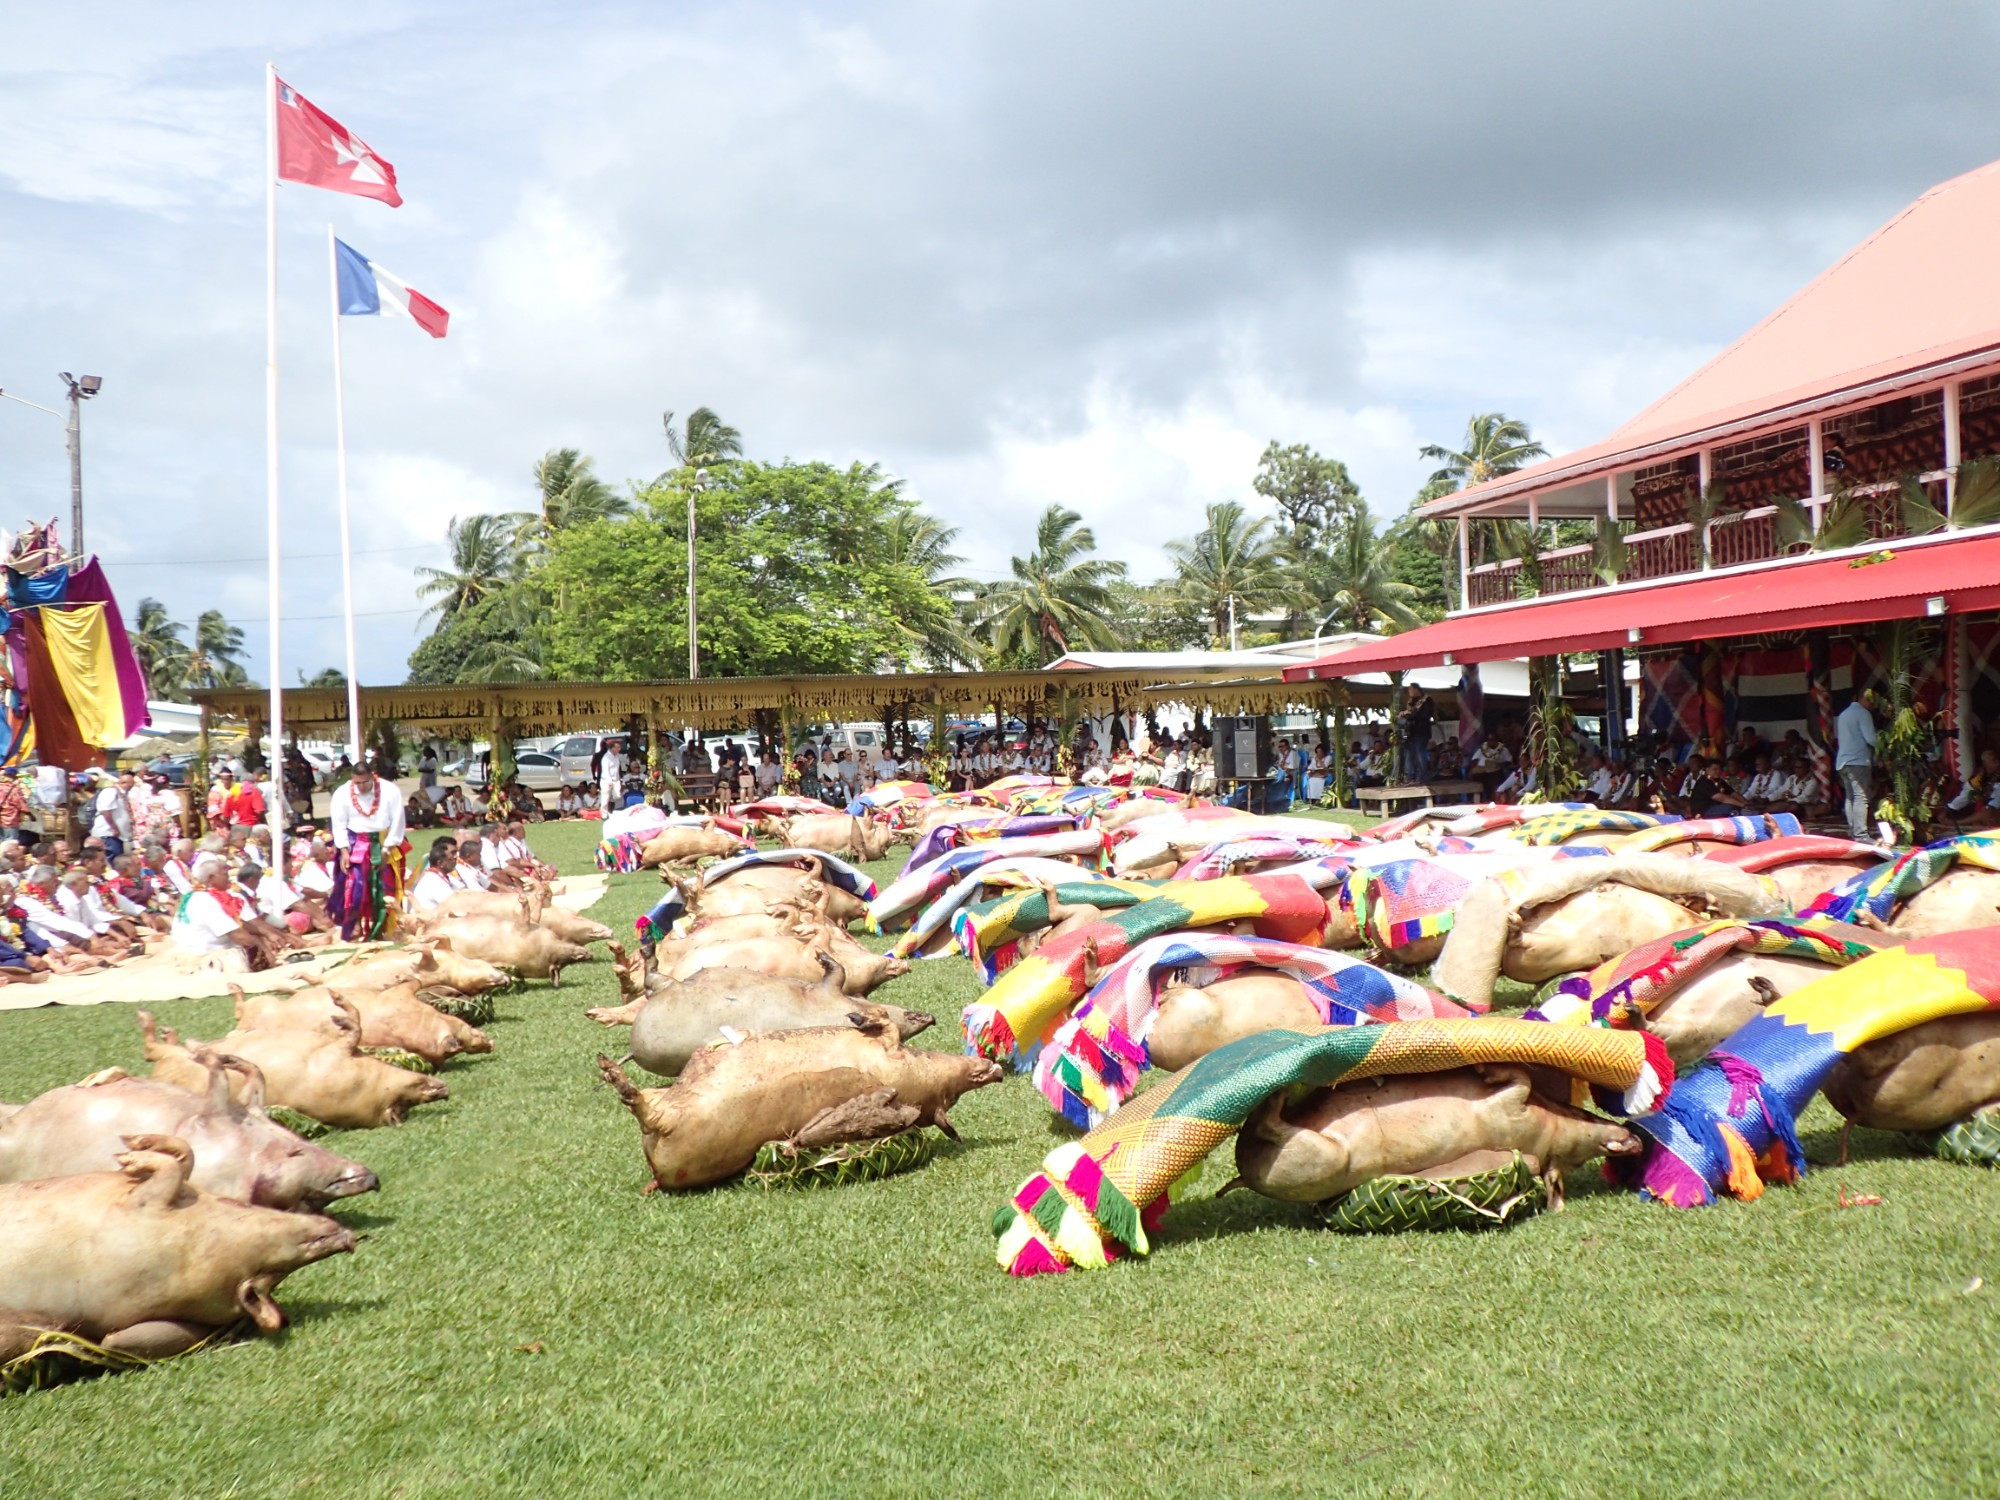 Festivities in front of the Palace in Mata'Utu